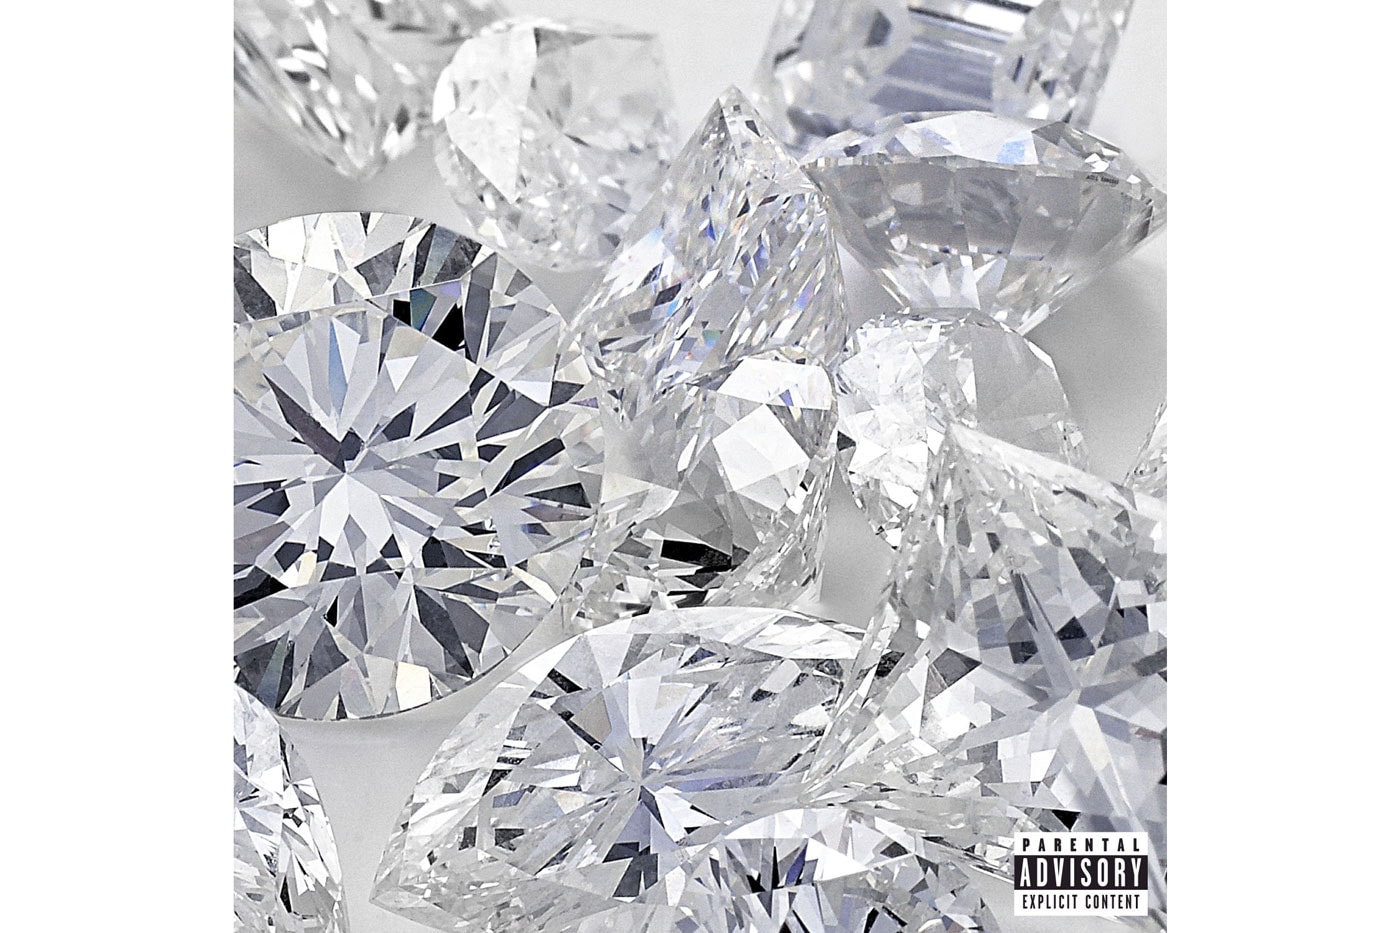 Listen To Drake and Future's Mixtape "What A Time To Be Alive" on Beats 1 Now